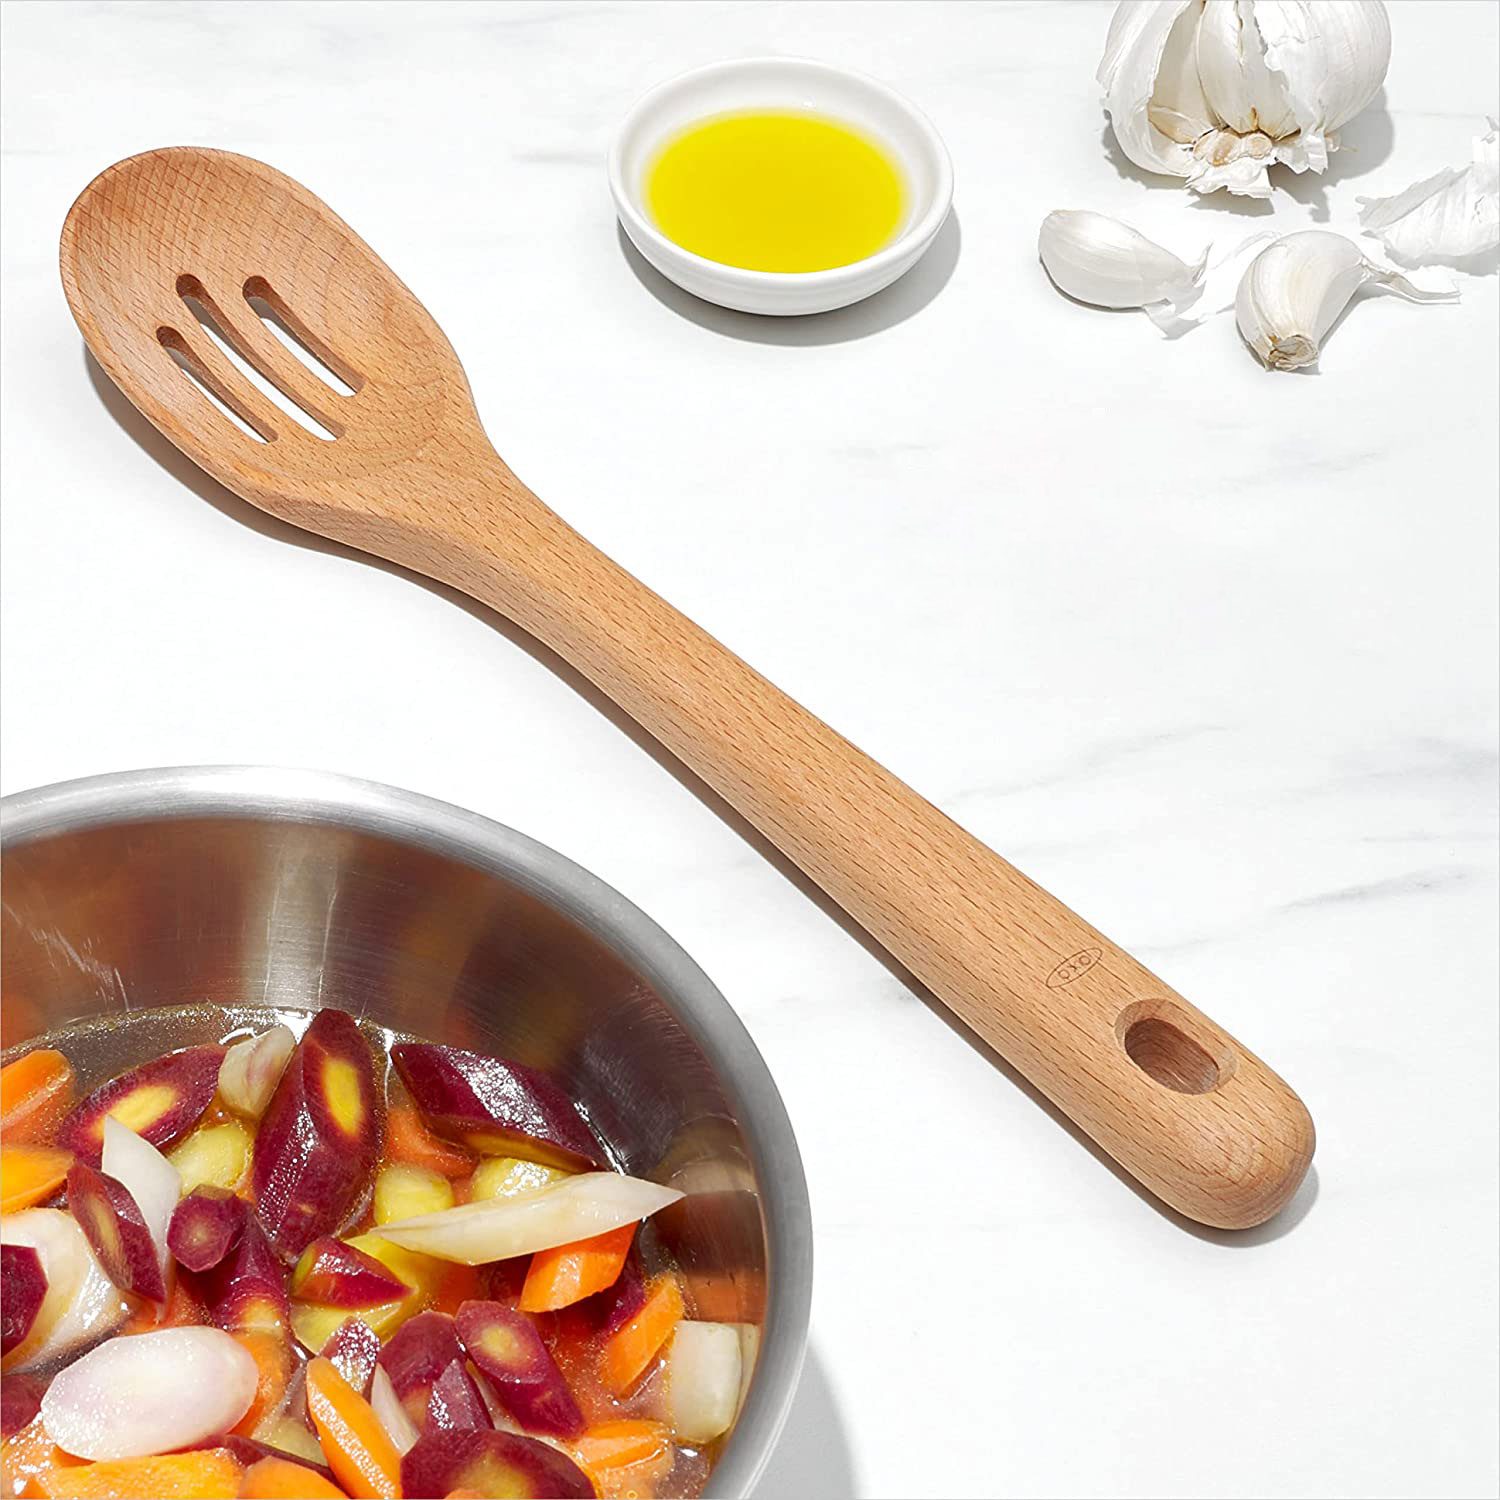 The Best Cooking Utensils You Need Now